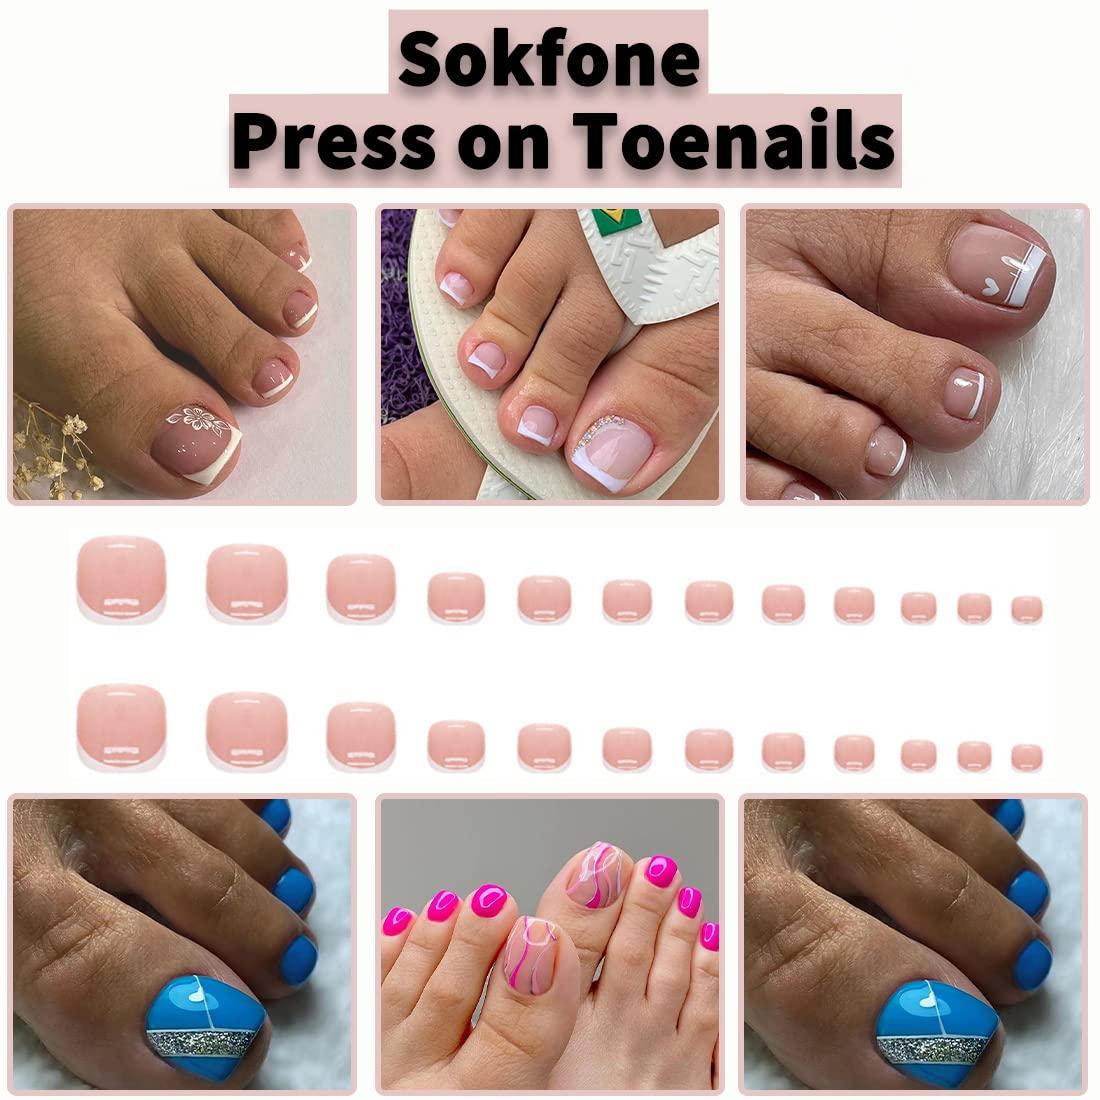 VOTACOS Press on Toenails Press on Nails Short Square 24PCS Fake Toeails  with Ombre Daisies Designs Nude Full Cover Glossy Toe Fake Nails Acrylic  Toenails for W… | Acrylic toe nails, Pretty toe nails, Acrylic toes